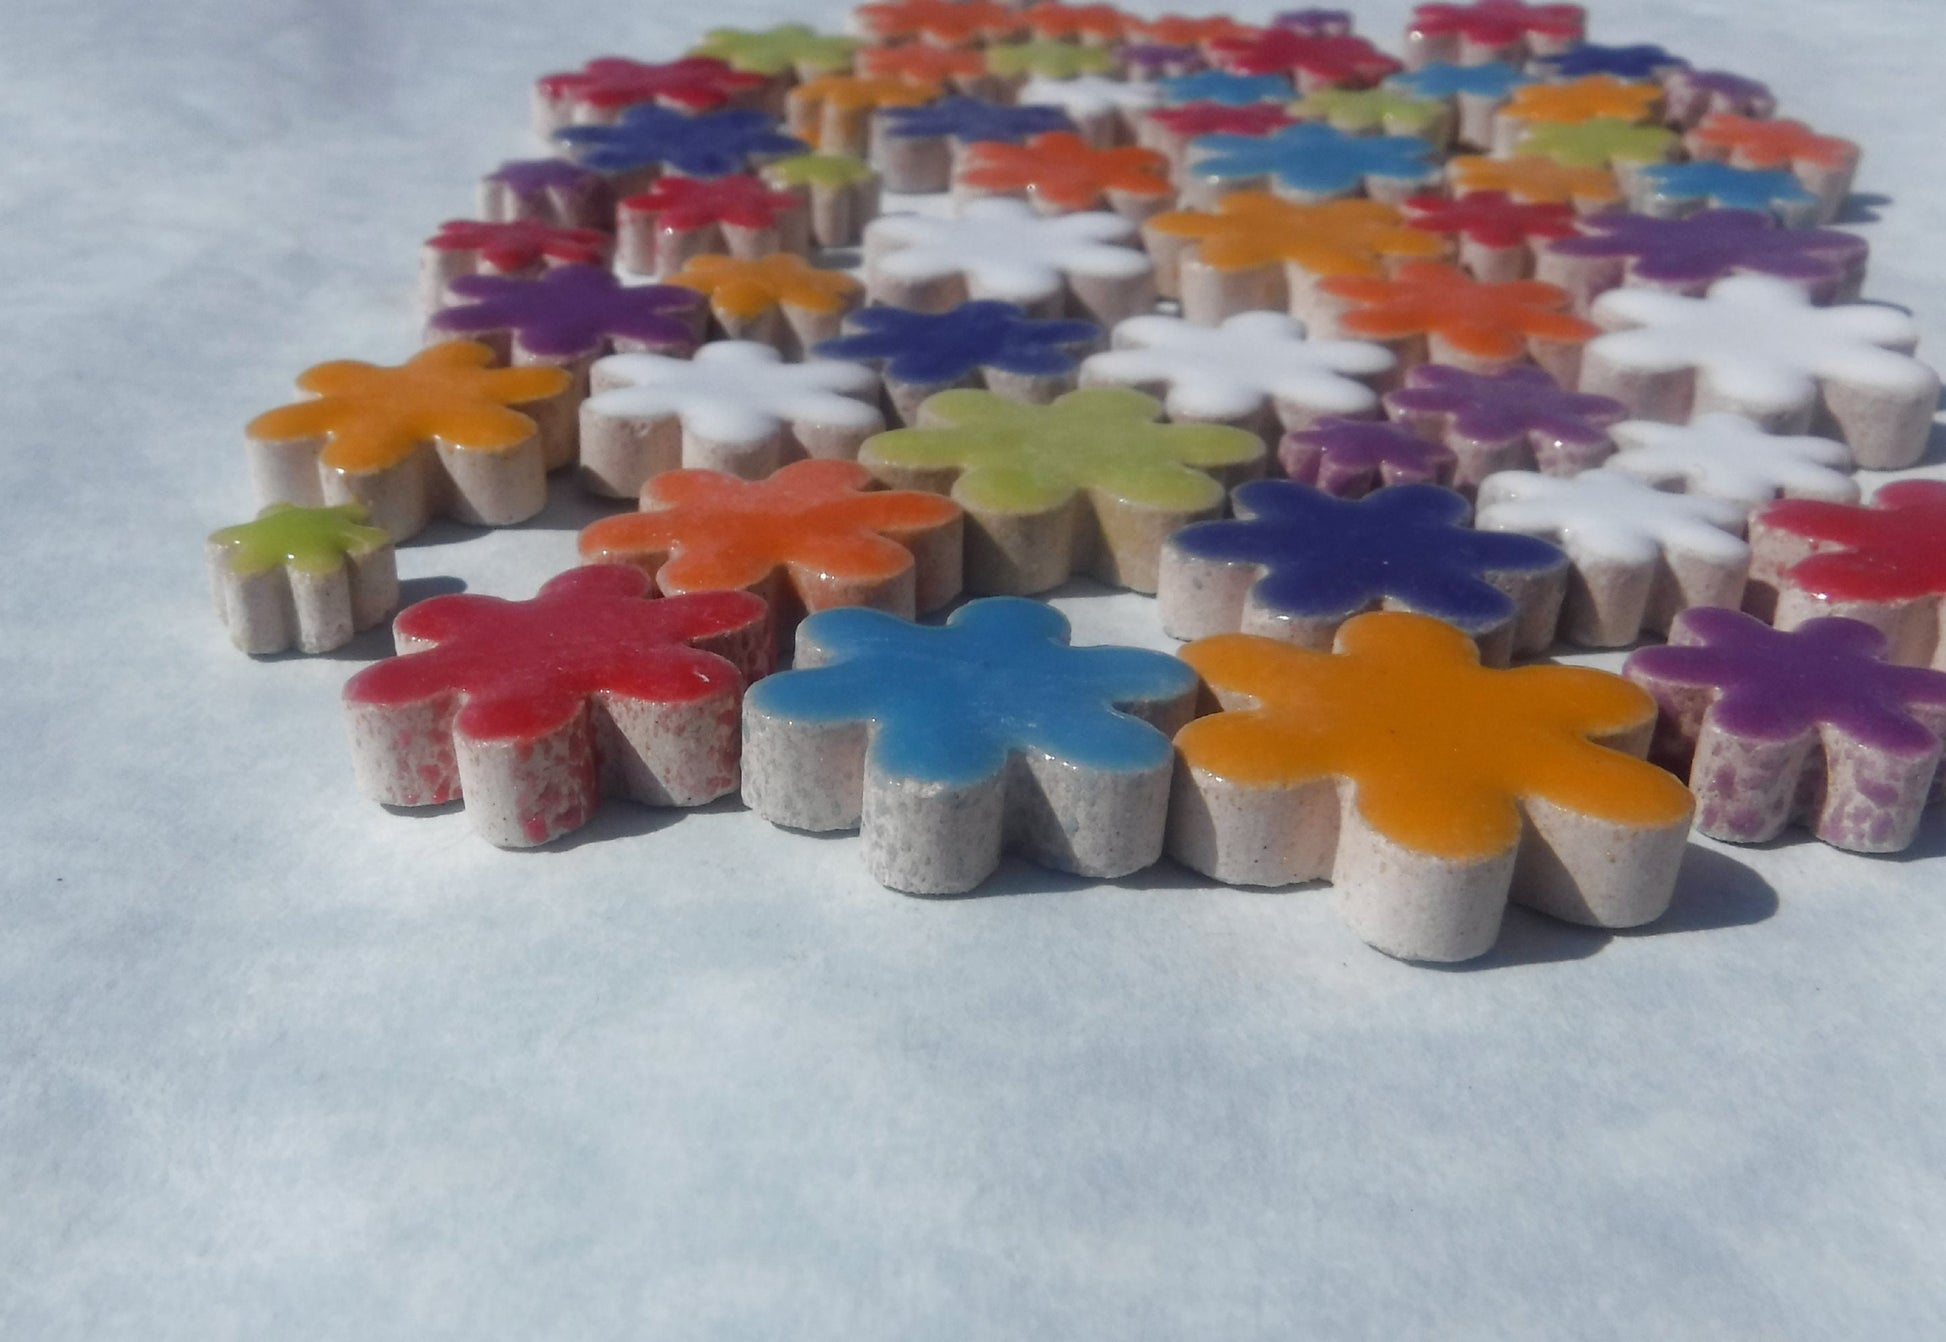 Pretty Posy Mix - Assorted Colors and Sizes of Ceramic Flowers Mosaic Tiles - 50g